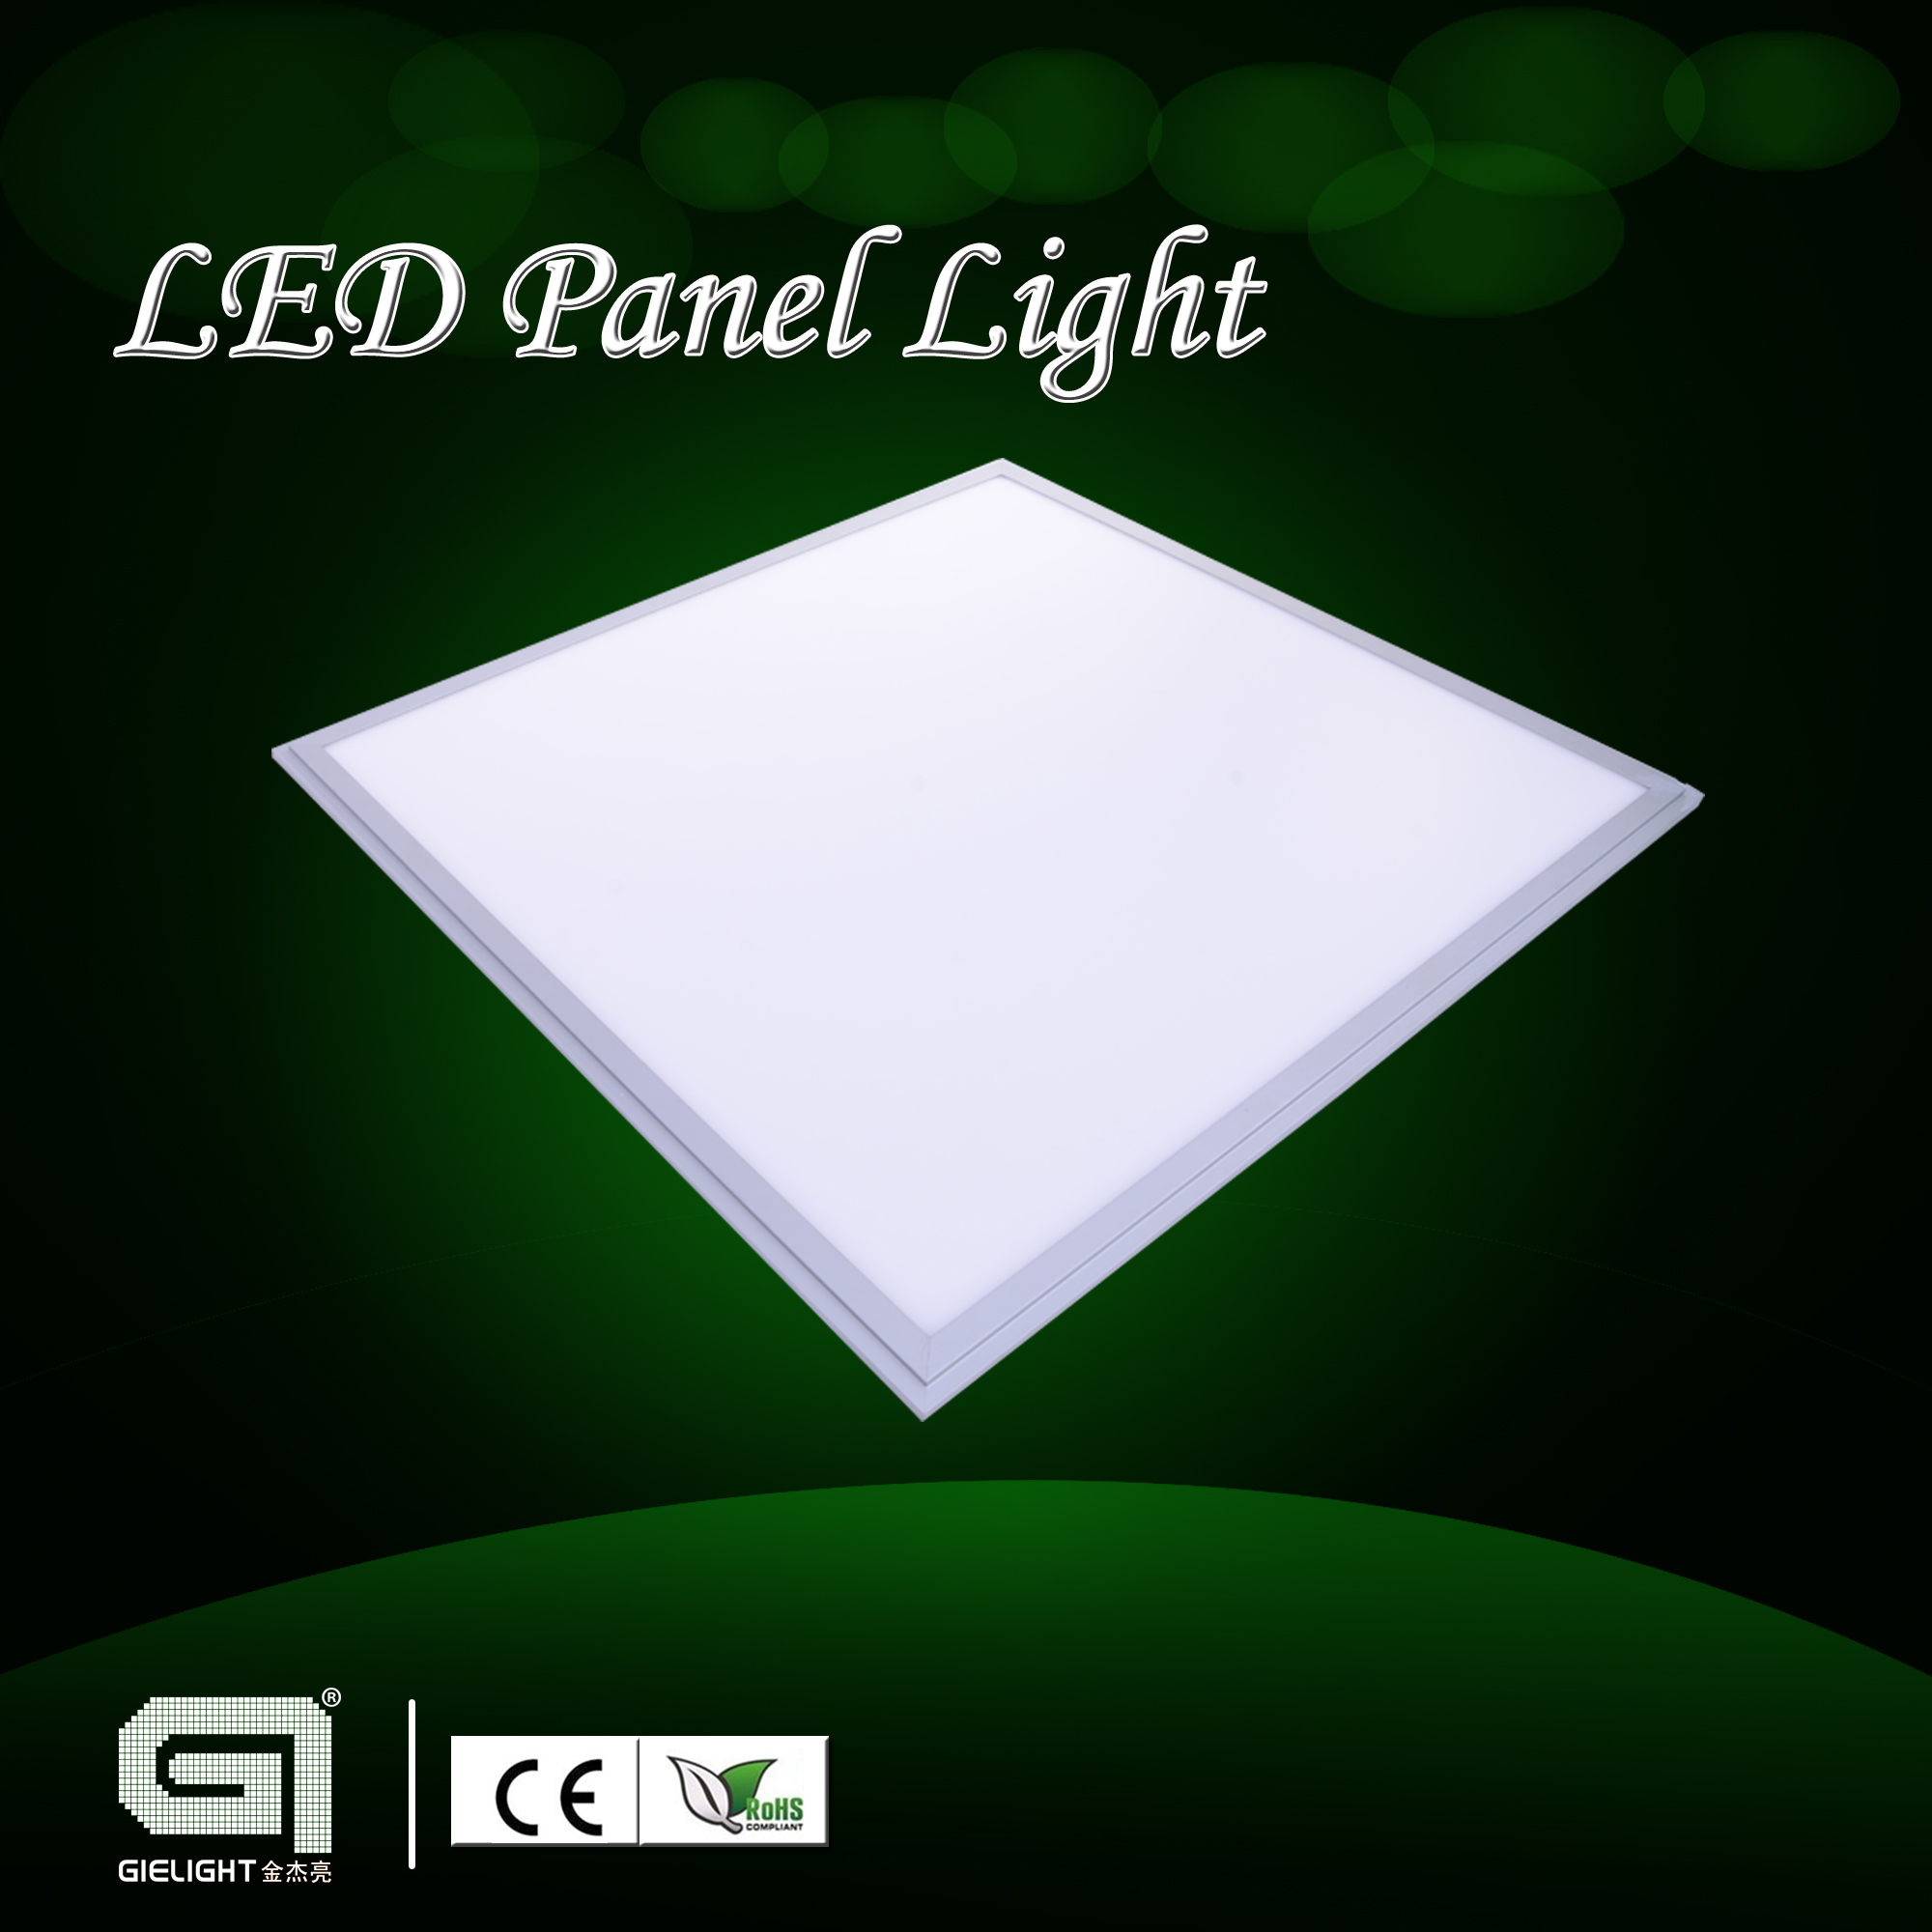 2015Amazing price $22.5 led light panel 60*60cm 36w recessed, suspended, mounted, office light